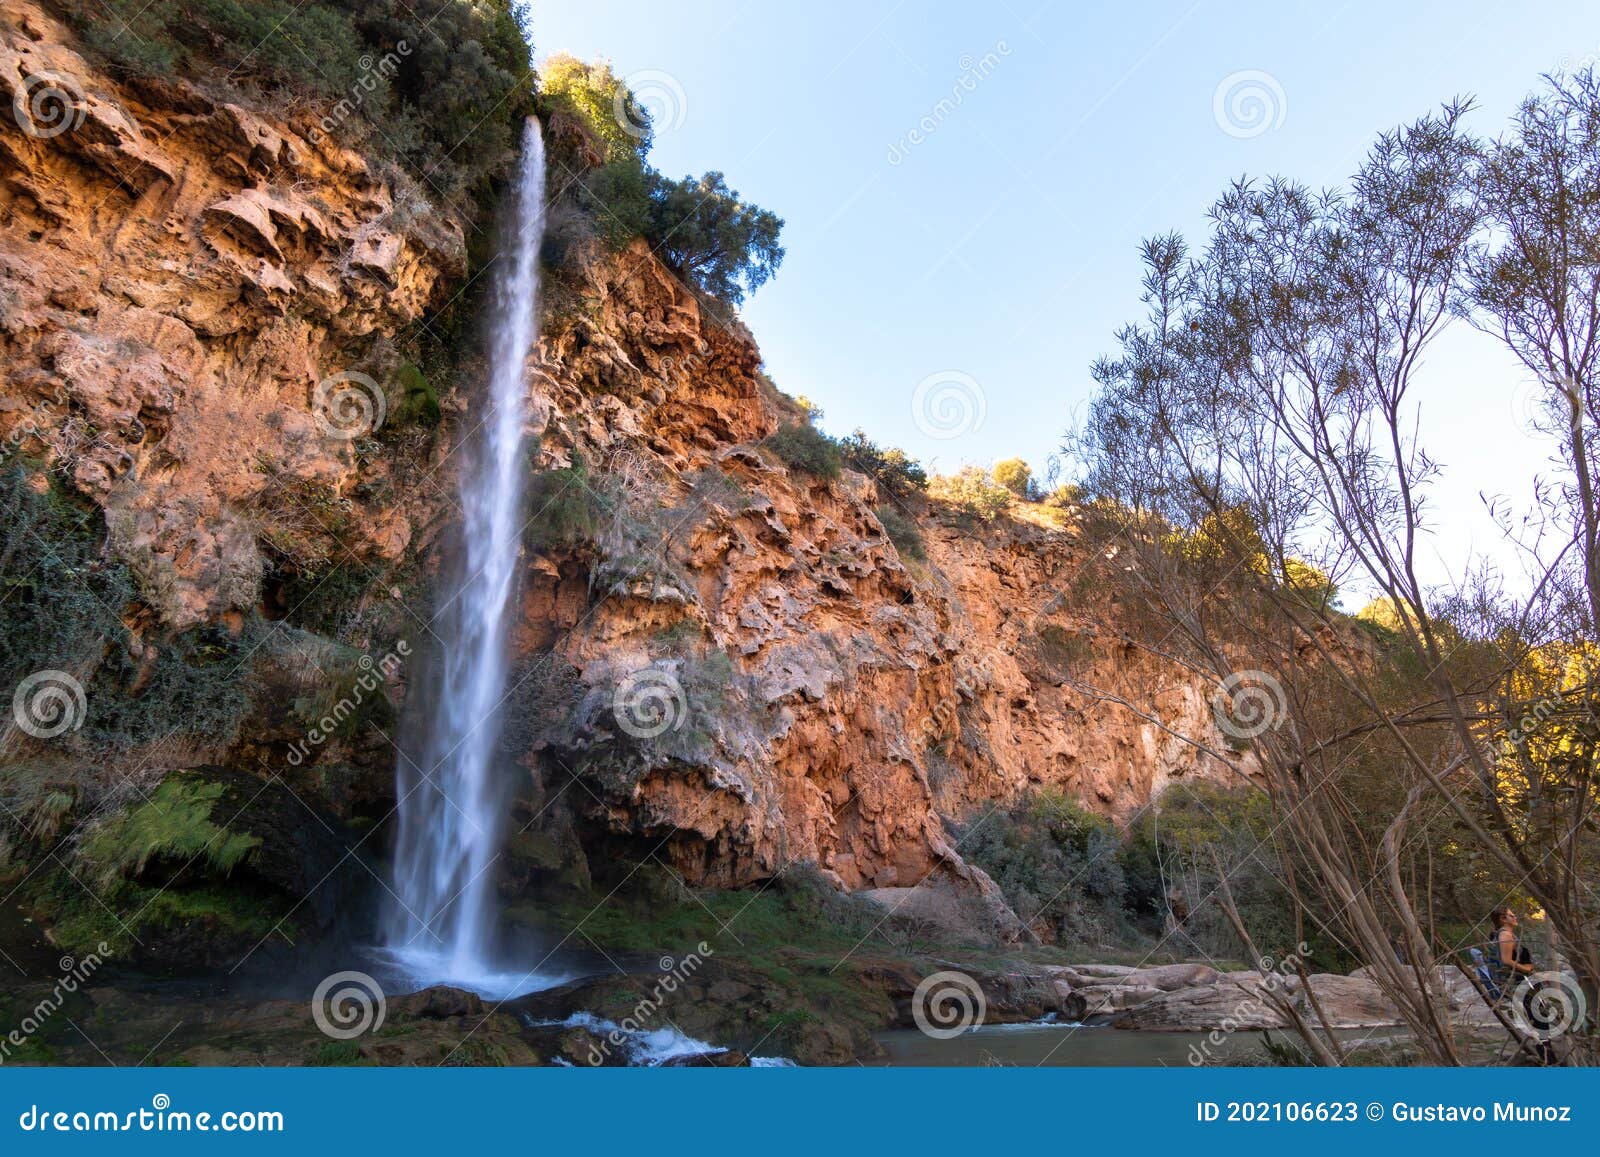 panoramic view of a 60 meter high waterfall called `el salto de la novia` the jump of the bride in castellÃÂ³n, spain